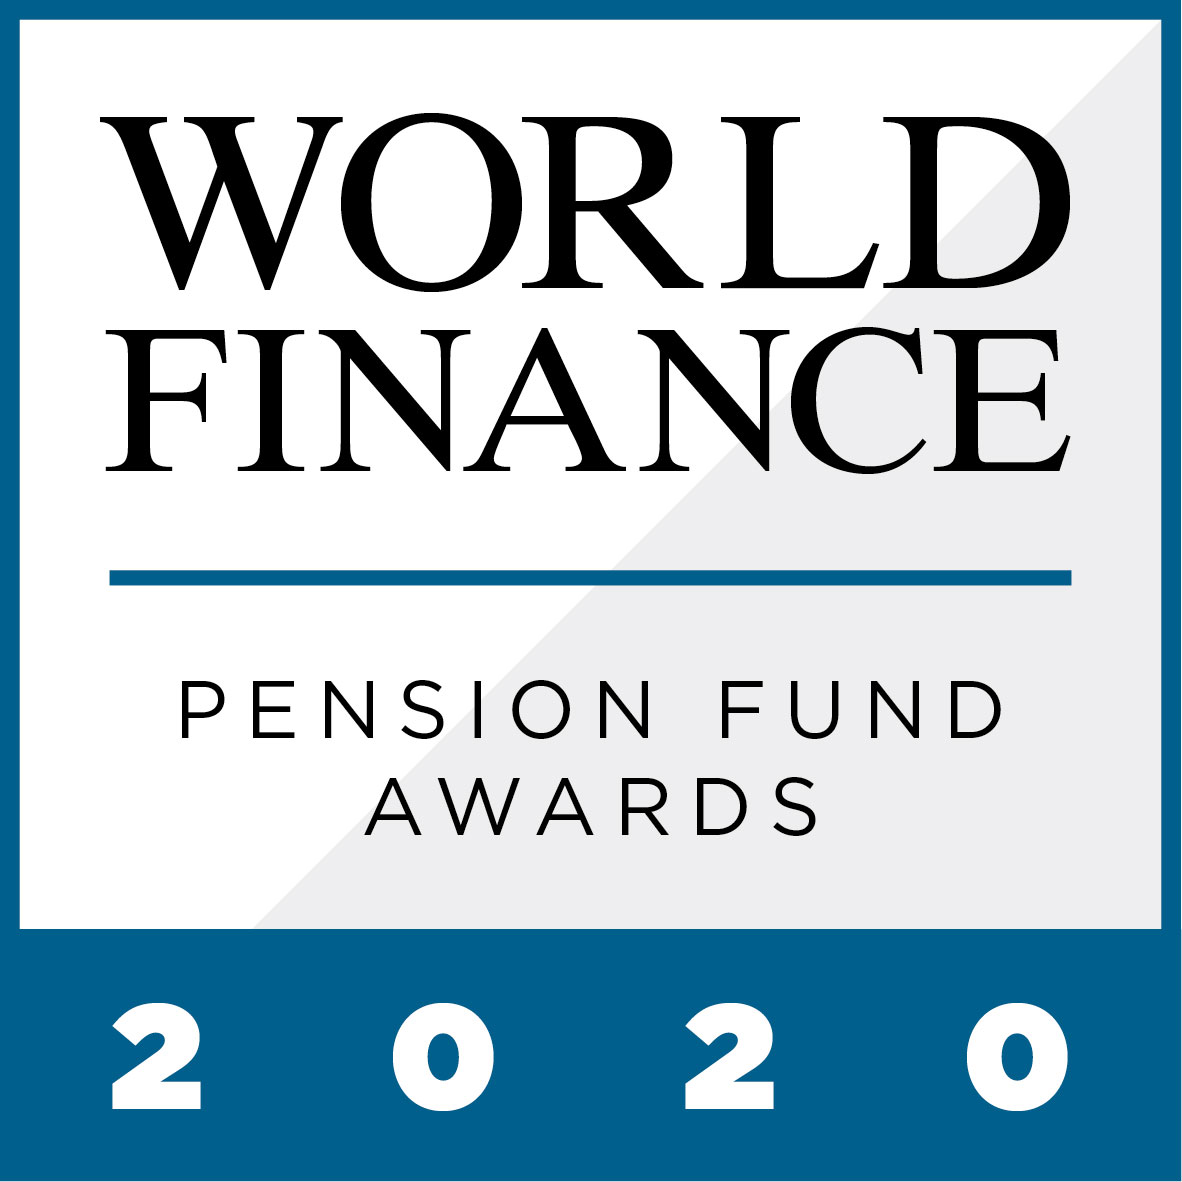 With an ageing population being recorded in most parts of the world, the importance of saving for retirement has taken on greater significance. The World Finance Pension Fund Awards 2020 identify the companies that are helping individuals create saving plans that are right for them